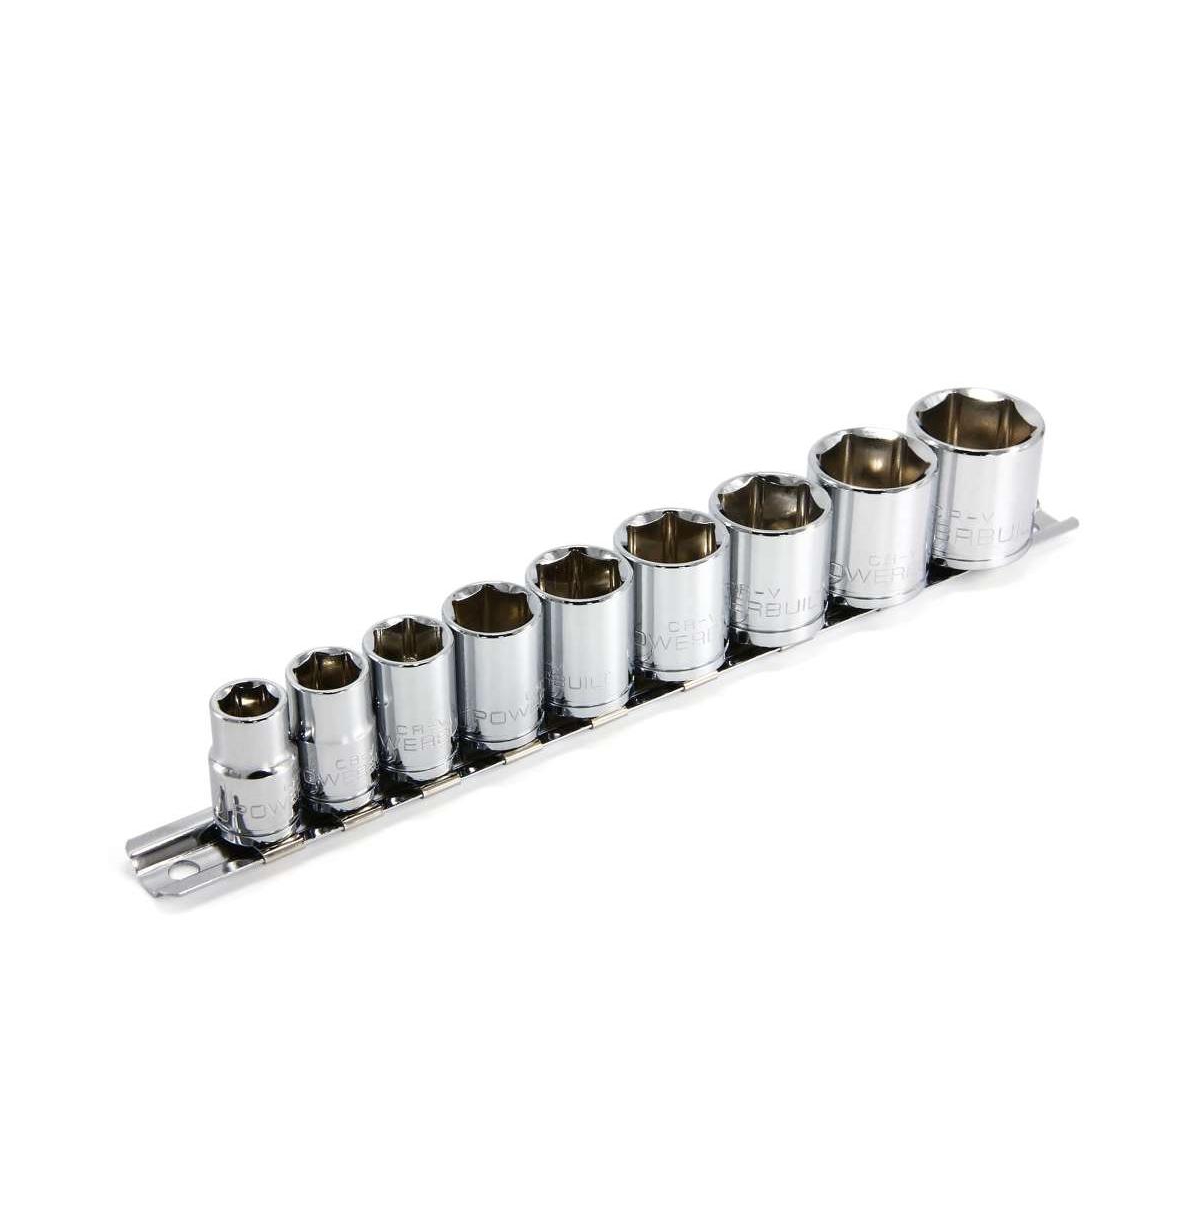 9 Piece 3/8 Inch Drive Sae 6 Point. Shallow Socket Set - Silver